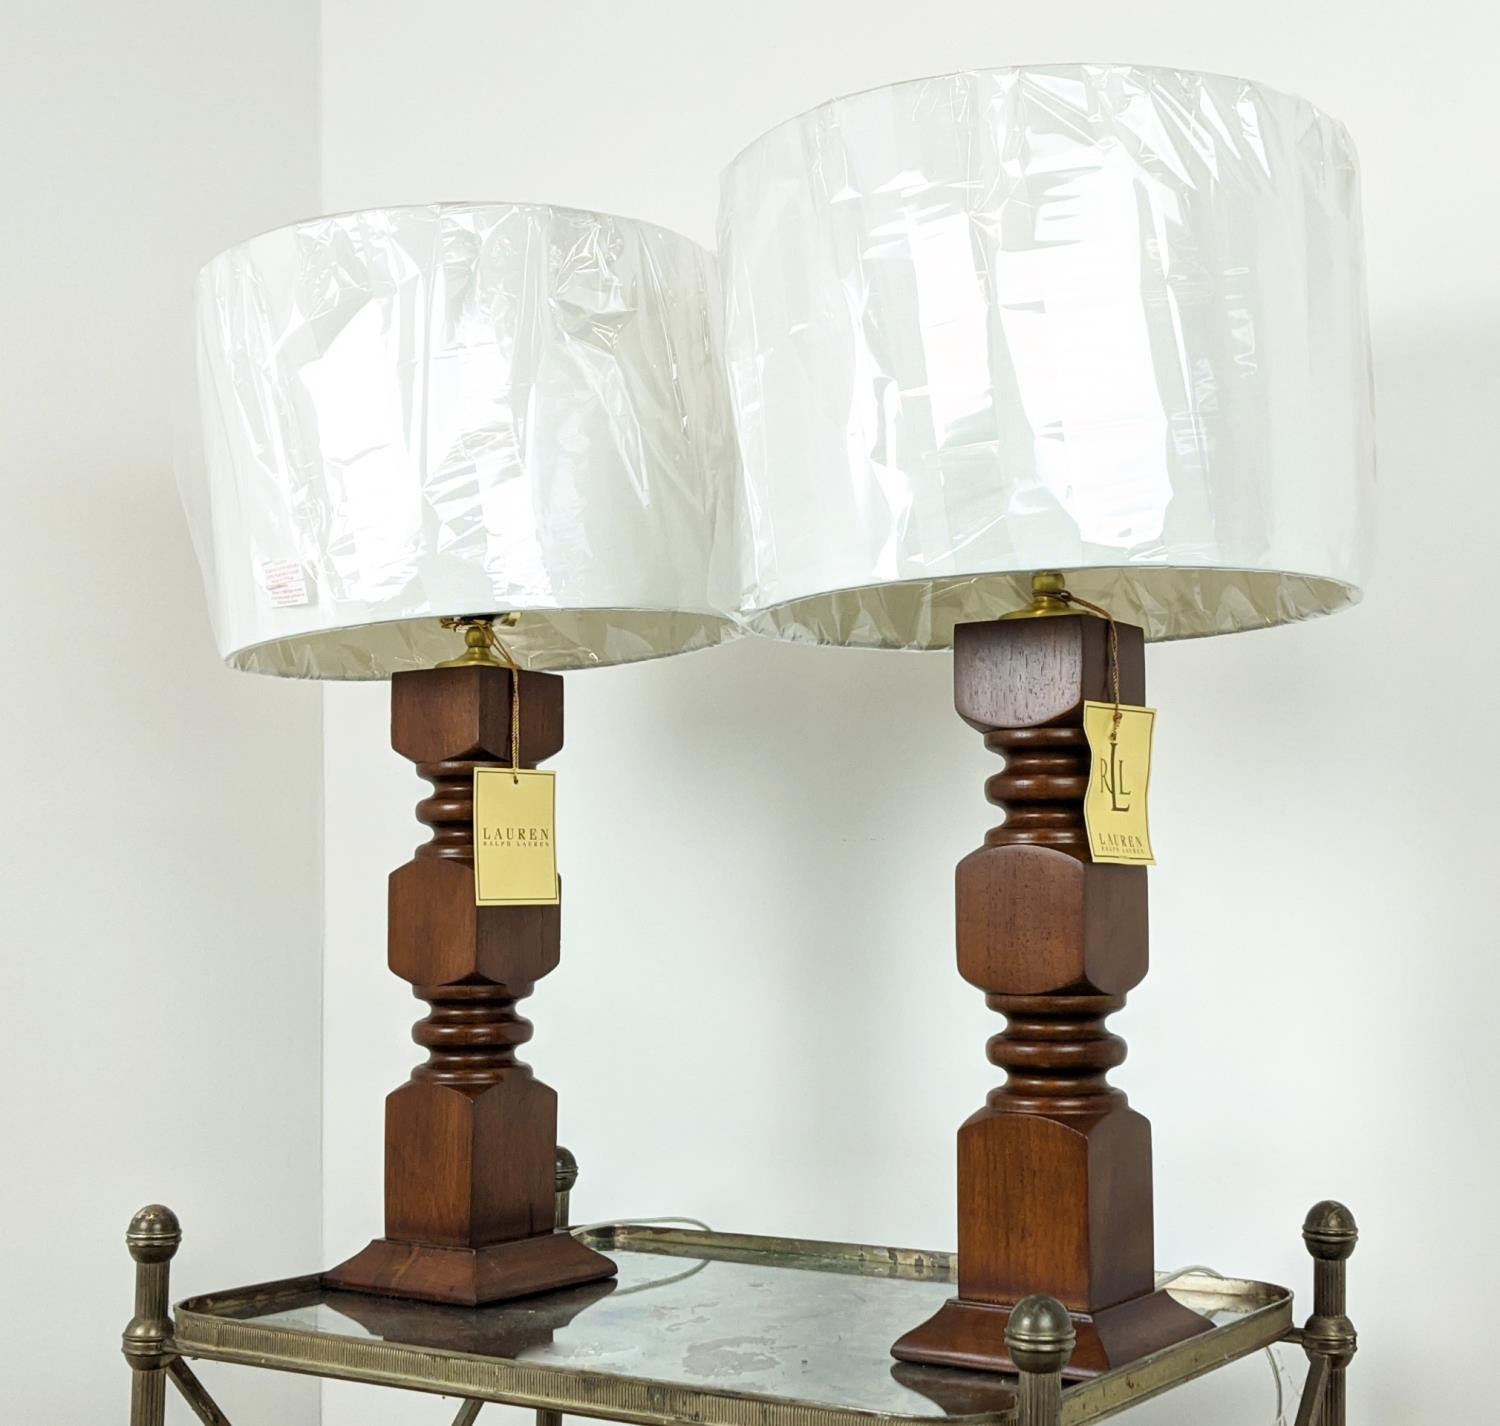 LAUREN RALPH LAUREN HOME TABLE LAMPS, a pair, carved wood, with shades, 68cm H approx. (2) - Image 2 of 5